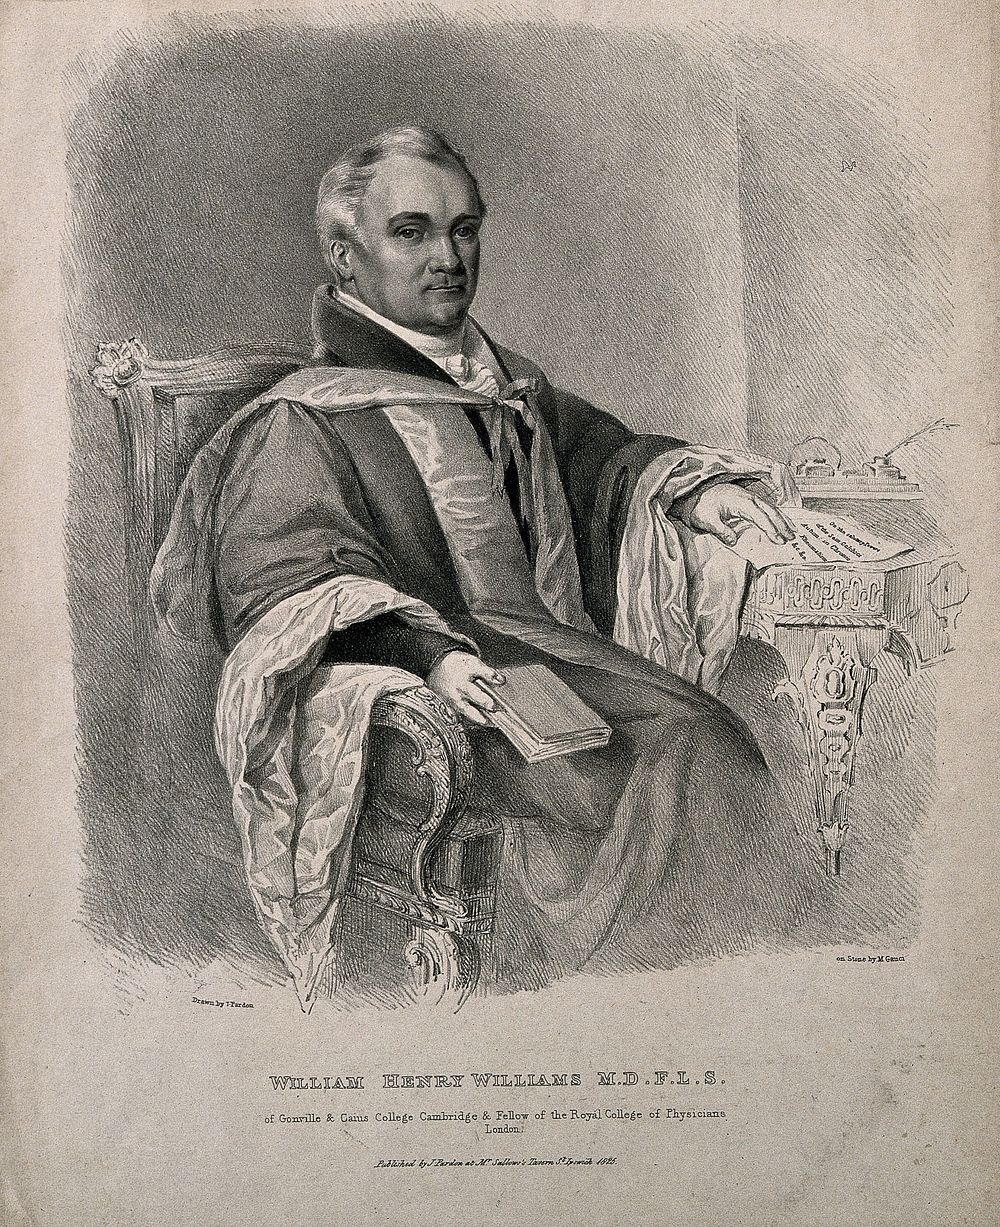 William Henry Williams. Lithograph by M. Gauci, 1825, after J. Pardon.